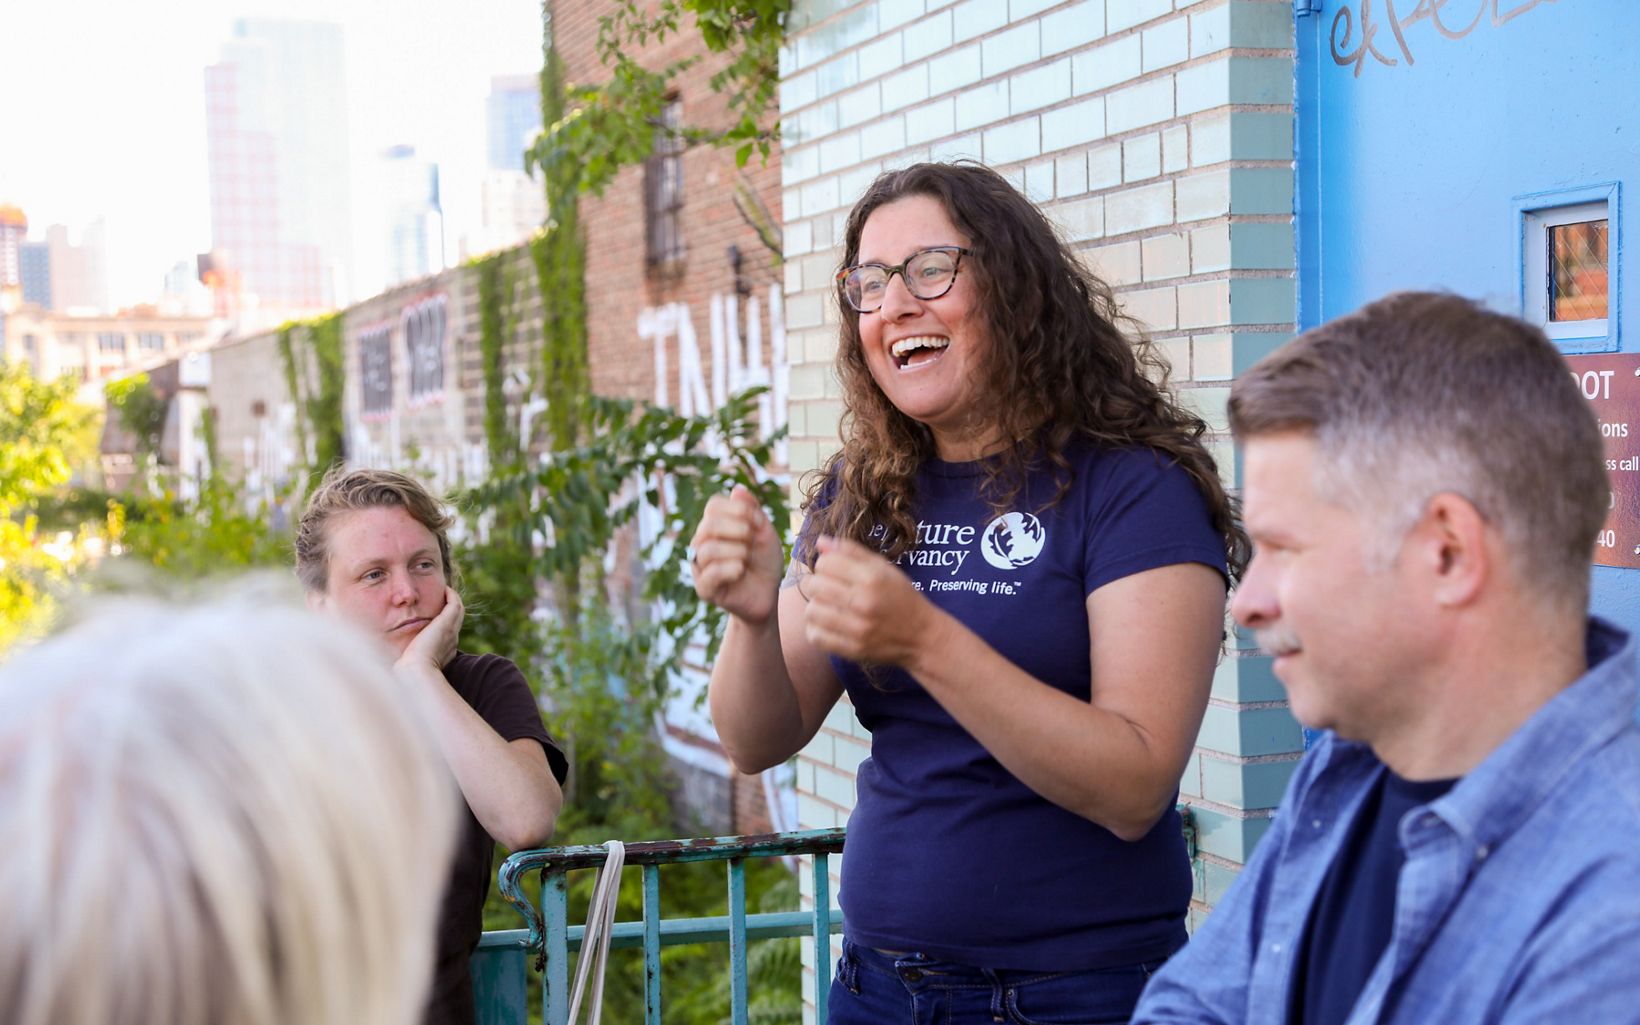 A woman wearing a blue t-shirt with The Nature Conservancy name and logo on it talks with a crowd. The woman is at the right side of the image, has brown curly hair, and wears glasses.